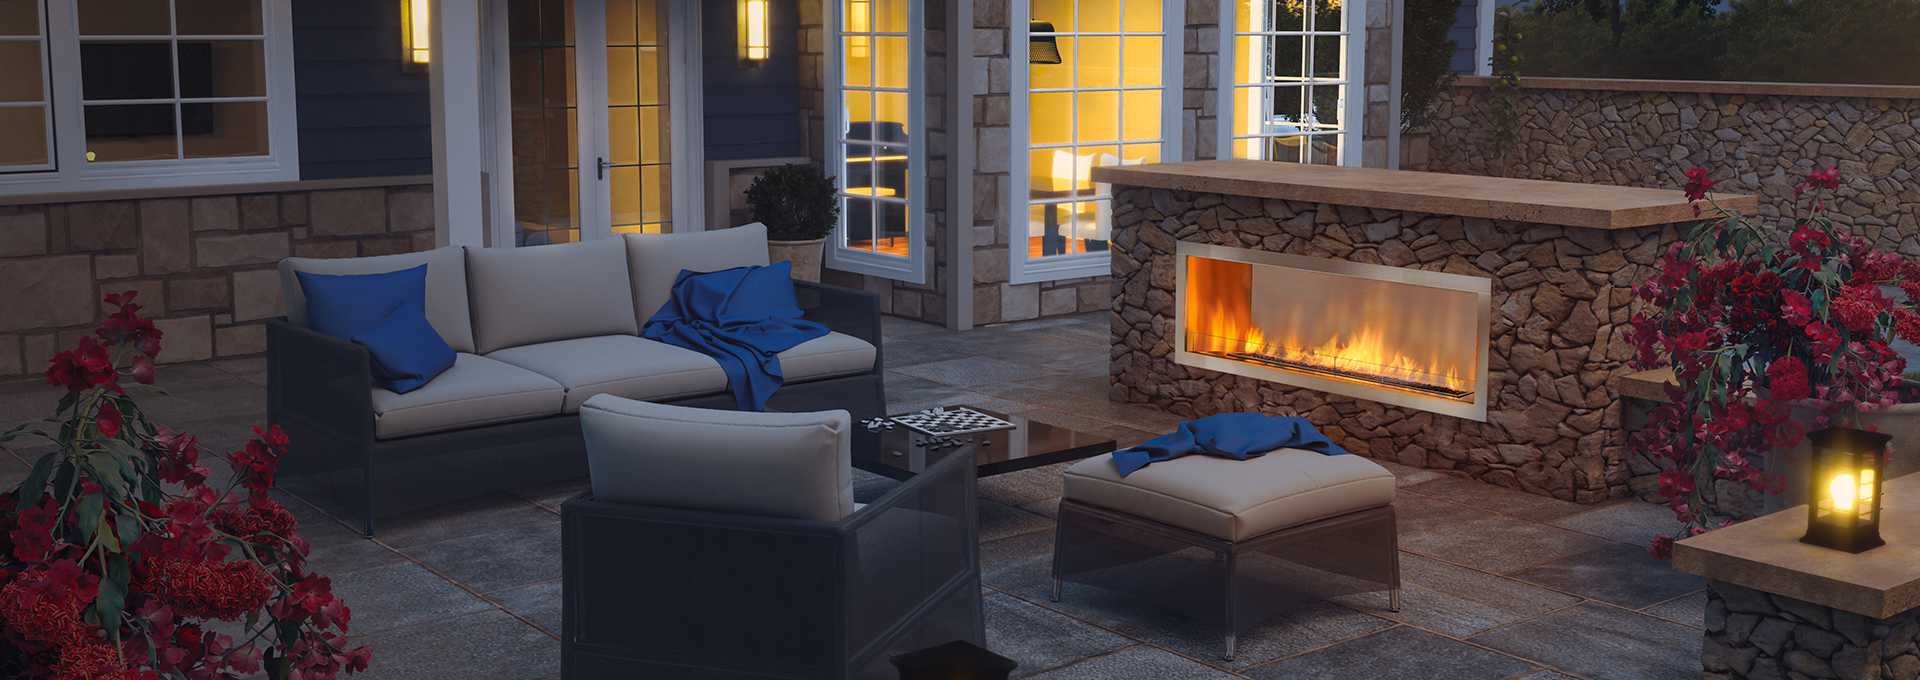 5 Features of High-Quality Outdoor Fireplaces  